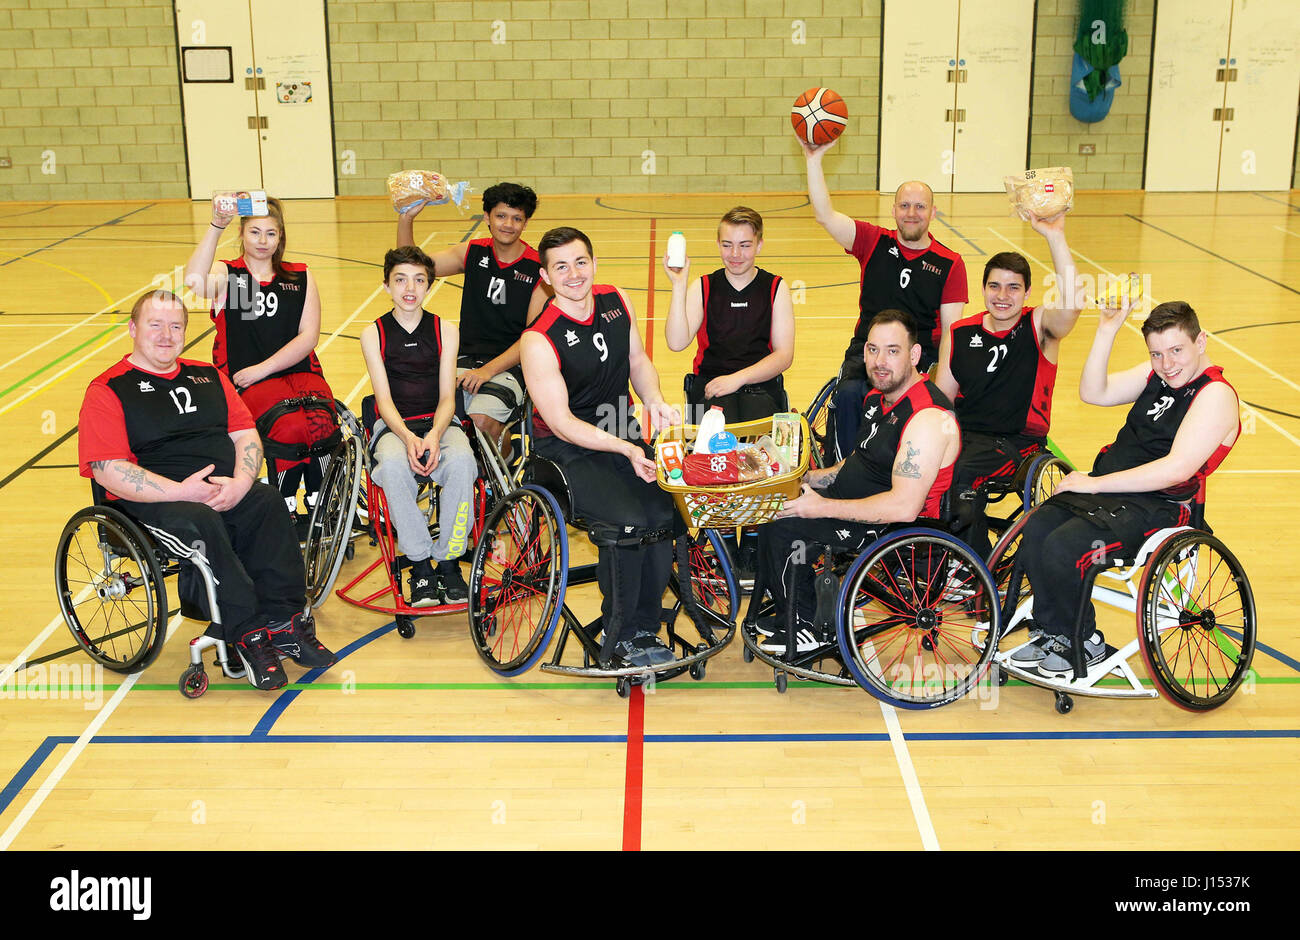 The Tees Valley Titans, a wheelchair sports team, at the Outwood Academy in Acklam, who received £5,347 and are among the 4,000 local good causes to have received part of a £9million pay out from the Co-op under its new membership scheme. Stock Photo